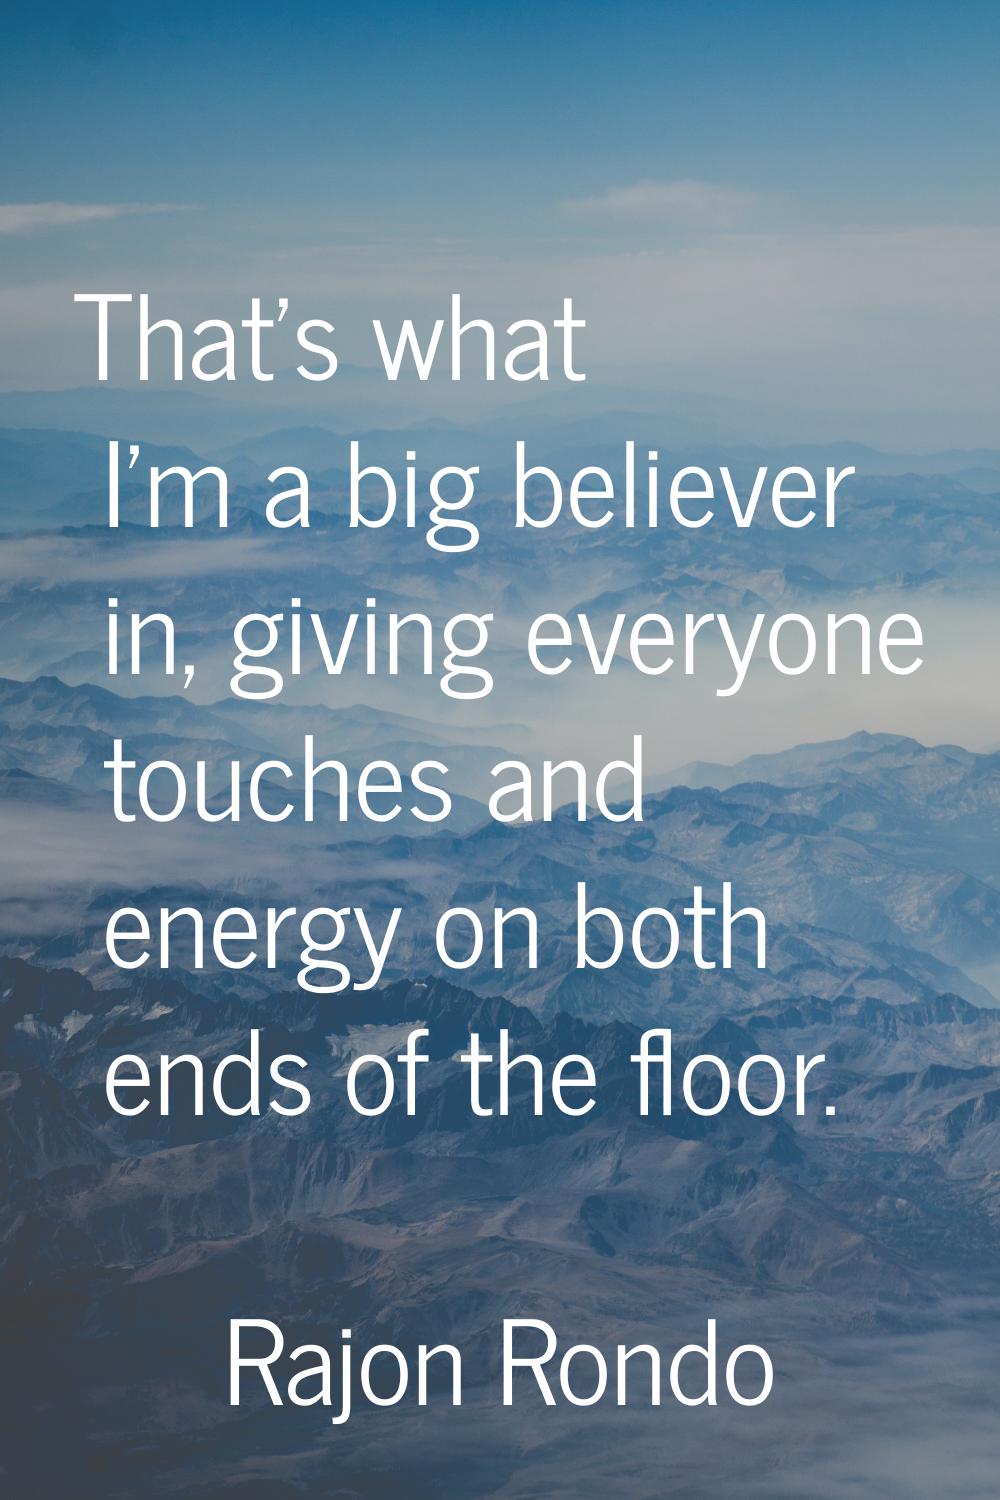 That's what I'm a big believer in, giving everyone touches and energy on both ends of the floor.